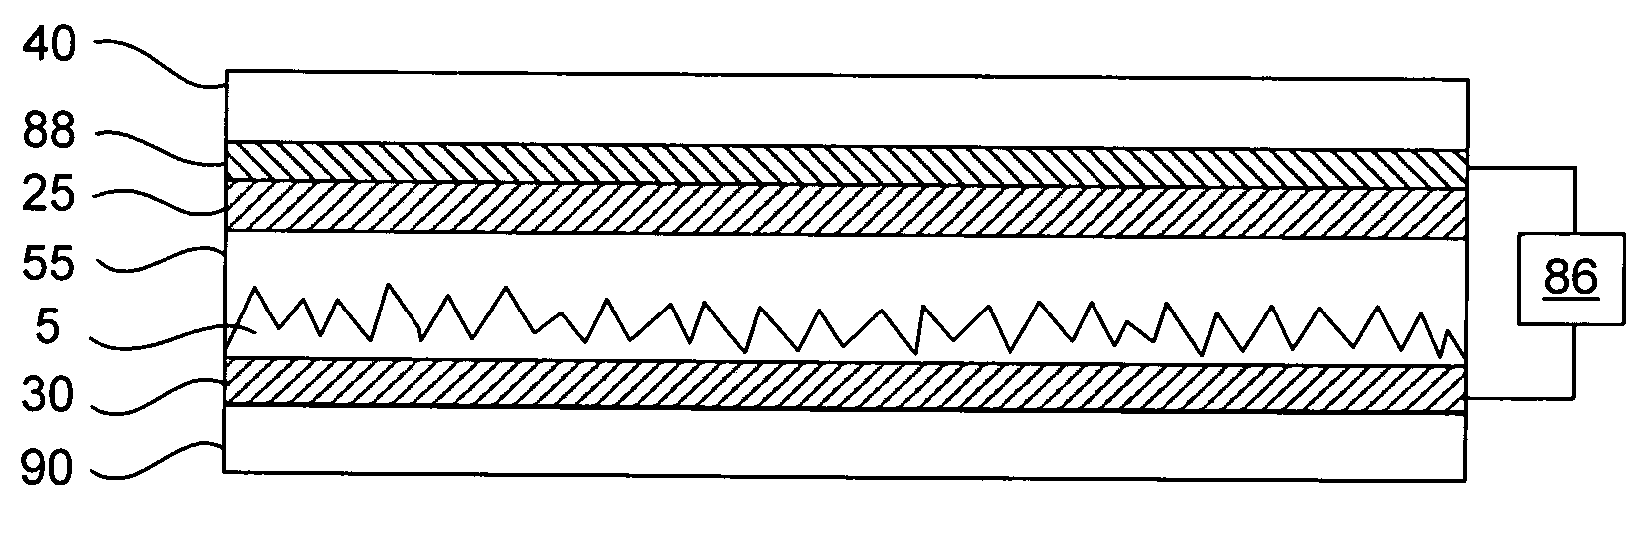 Diamond-like carbon devices and methods for the use and manufacture thereof